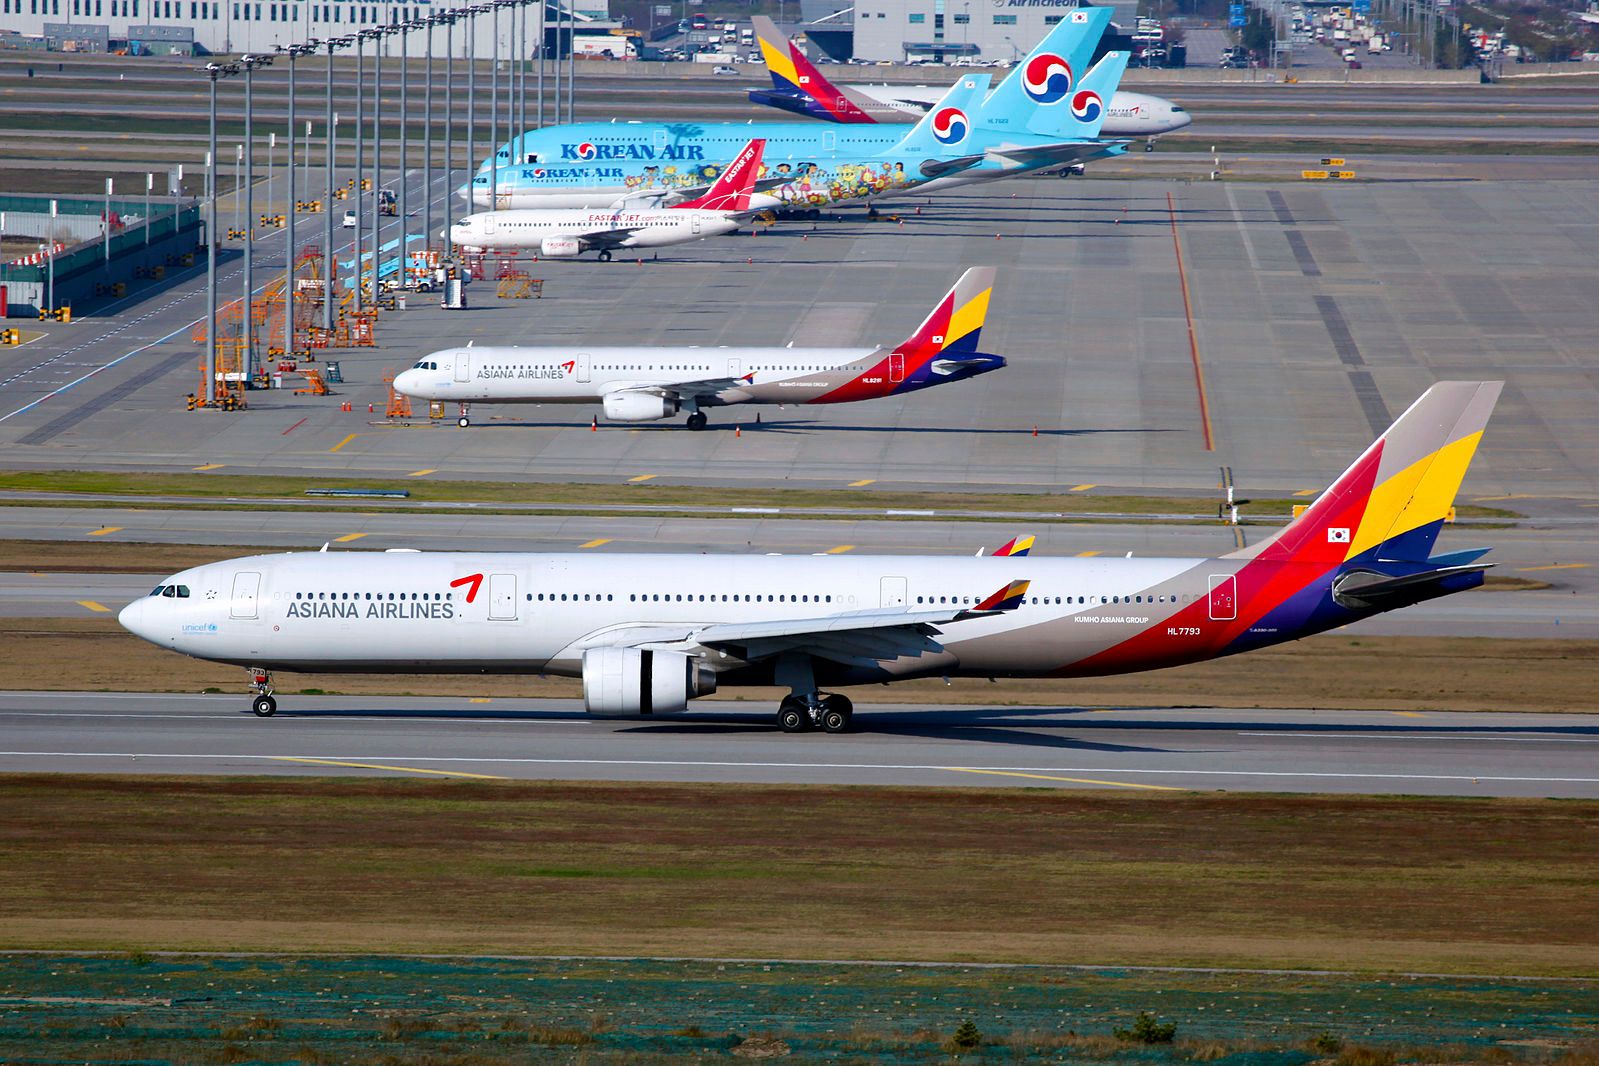 Asiana and Korean Air jets parked on airport apron